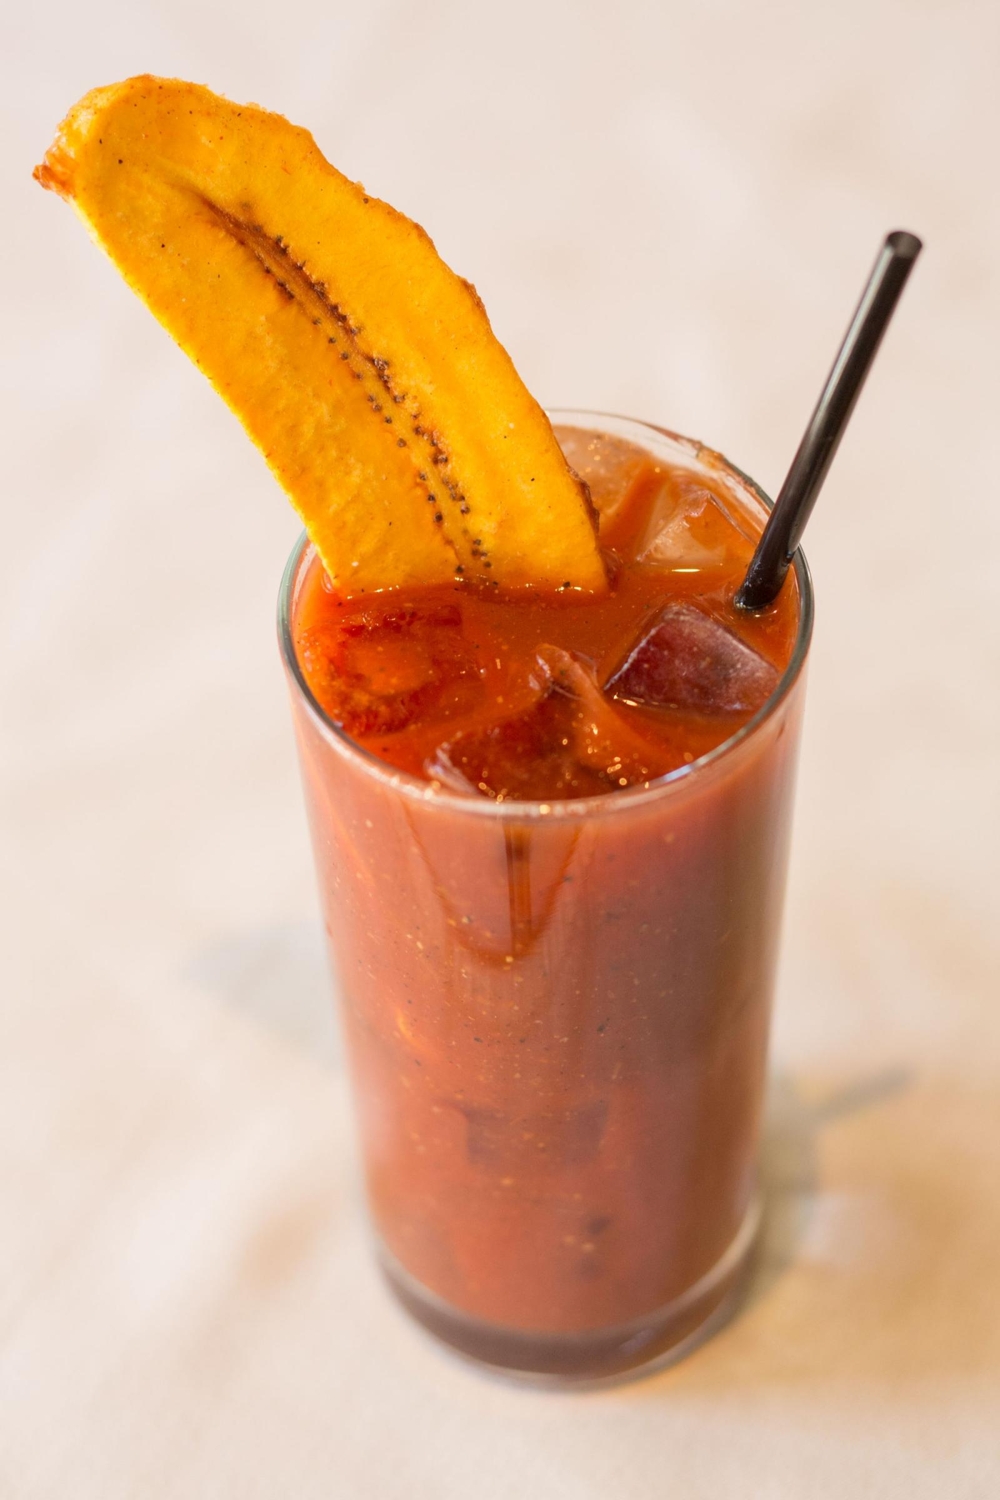 10 Bloody Mary recipes by Iron Chef Jose Garce.